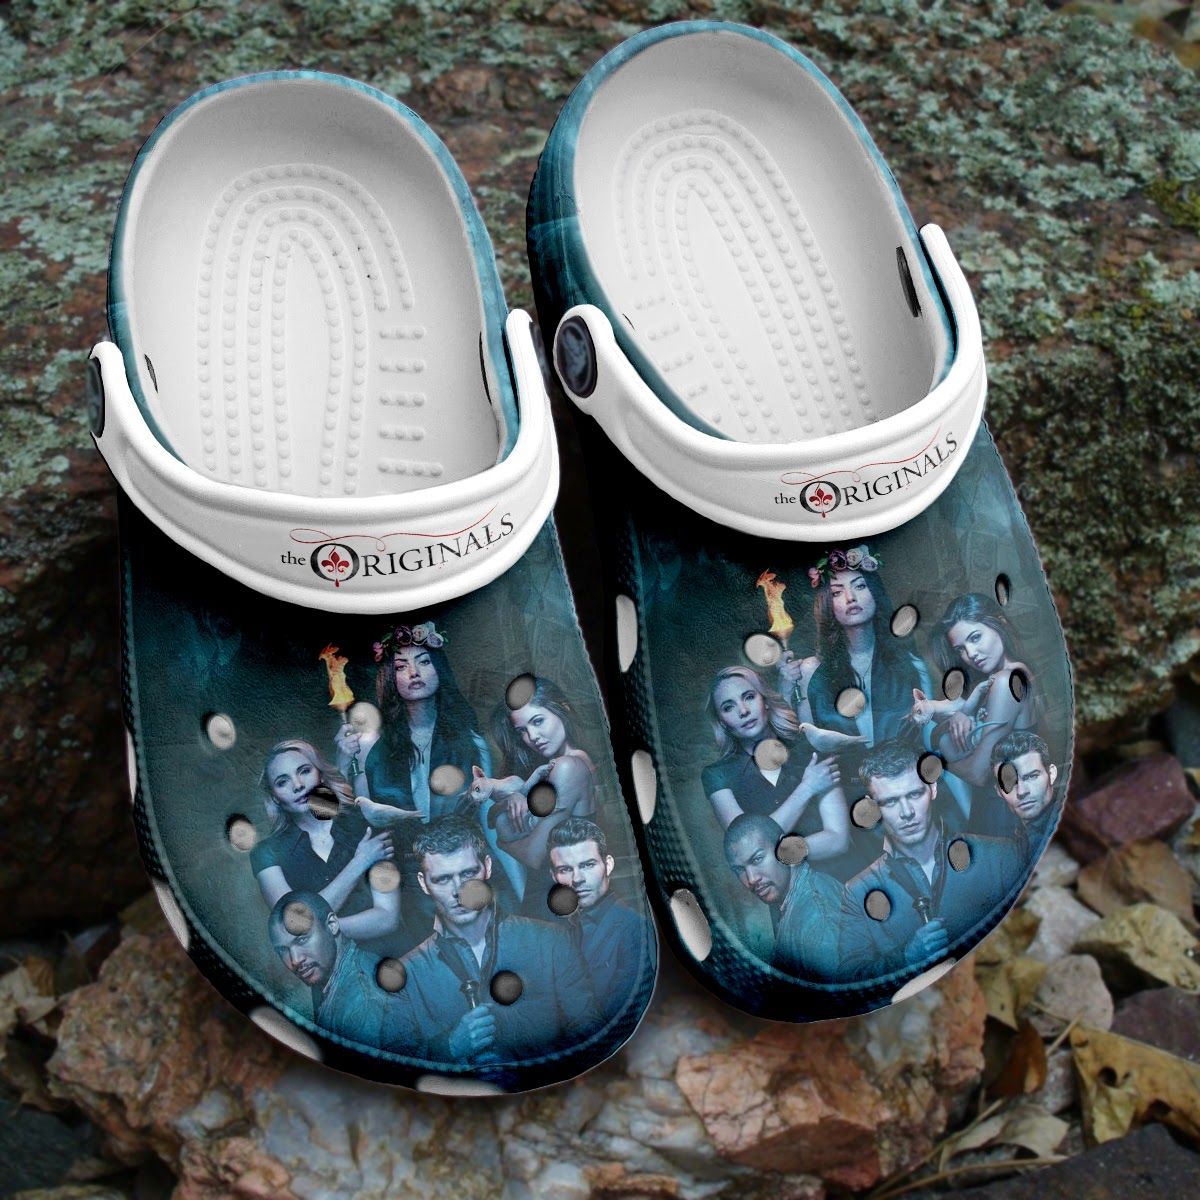 If you'd like to purchase a pair of Crocband Clogs, be sure to check out the official website. 165